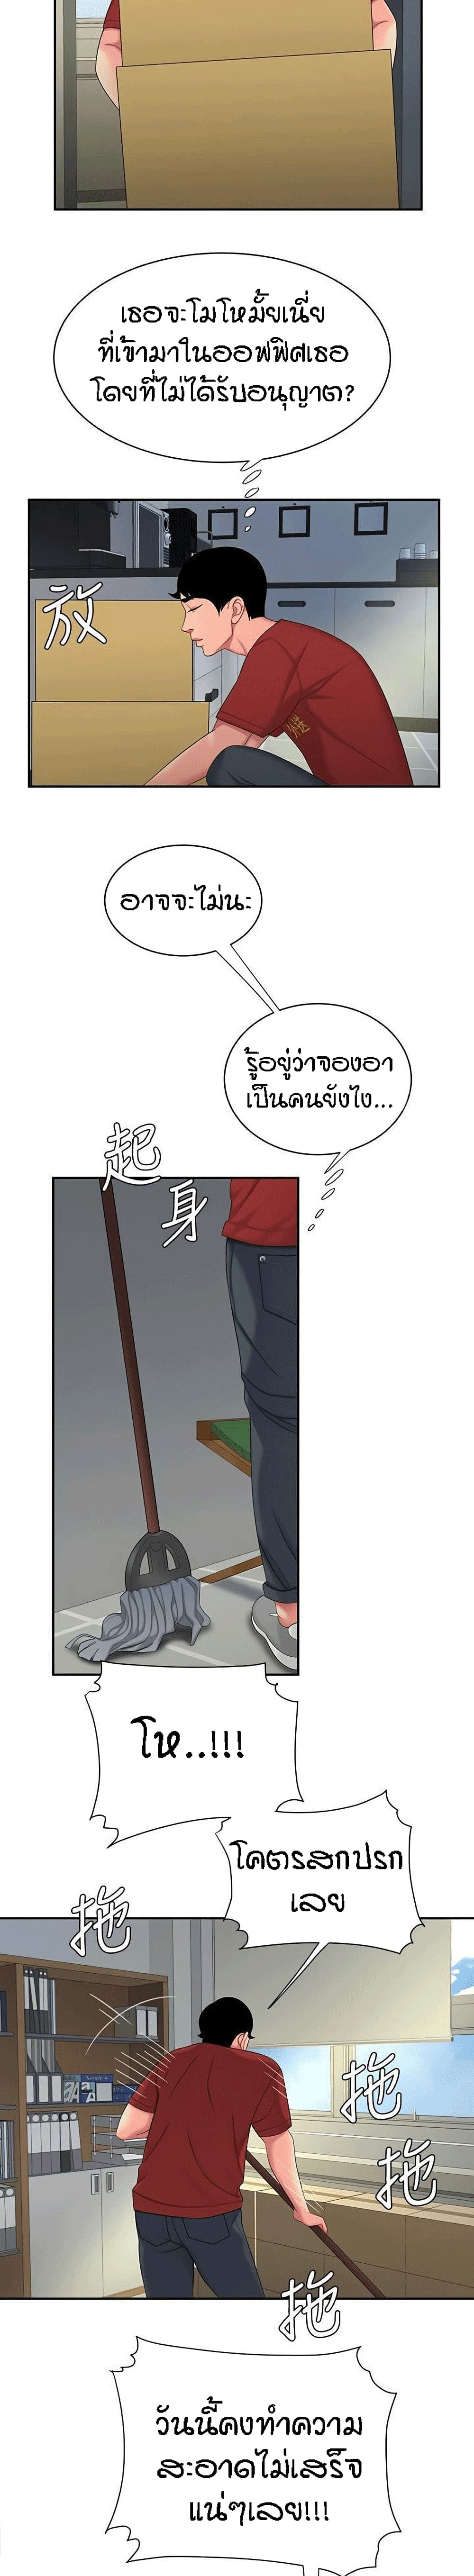 Delivery Man 51 (13)